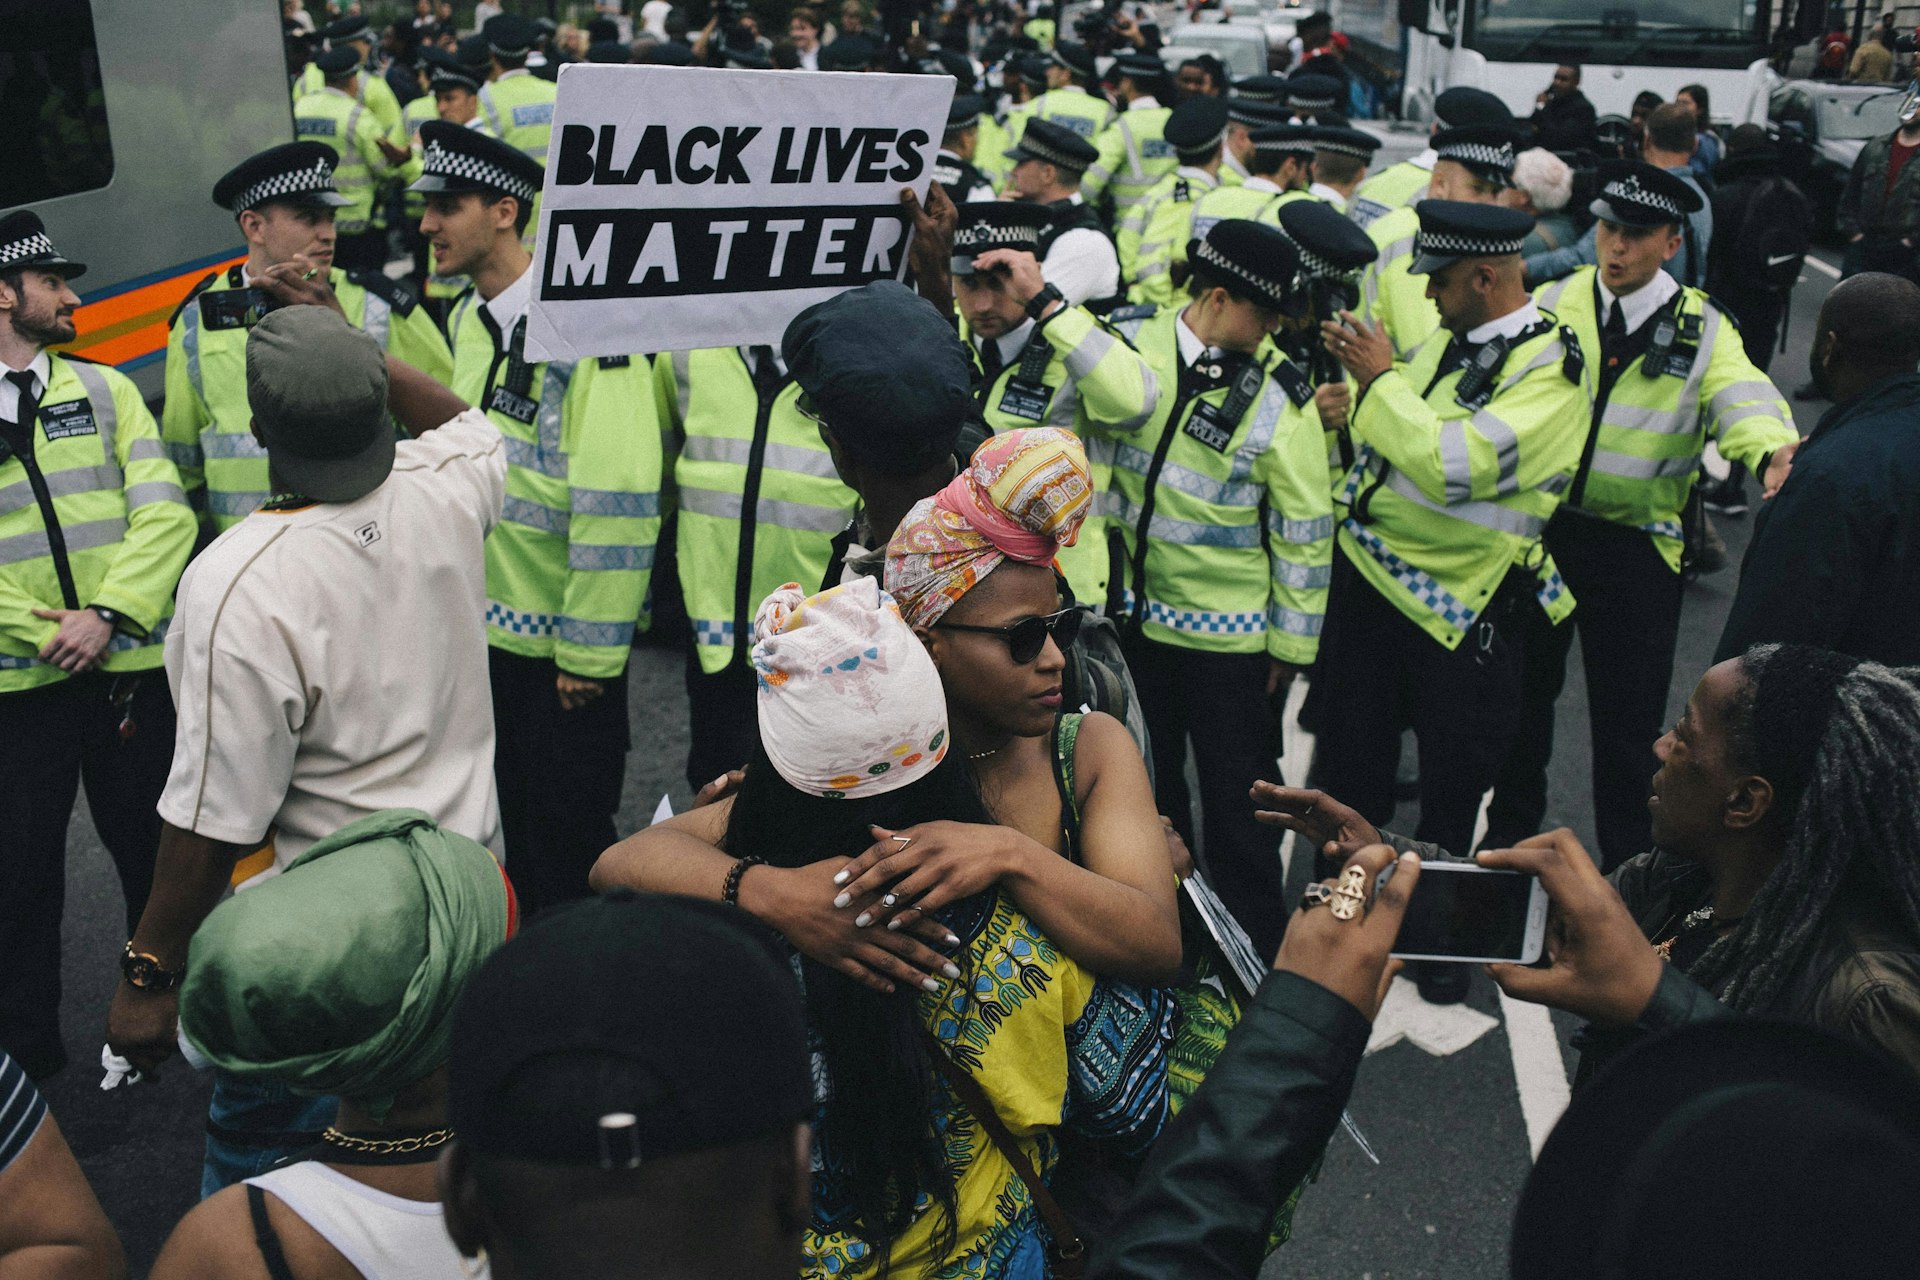 'Death here and promises of more': On police brutality and the fight we must win